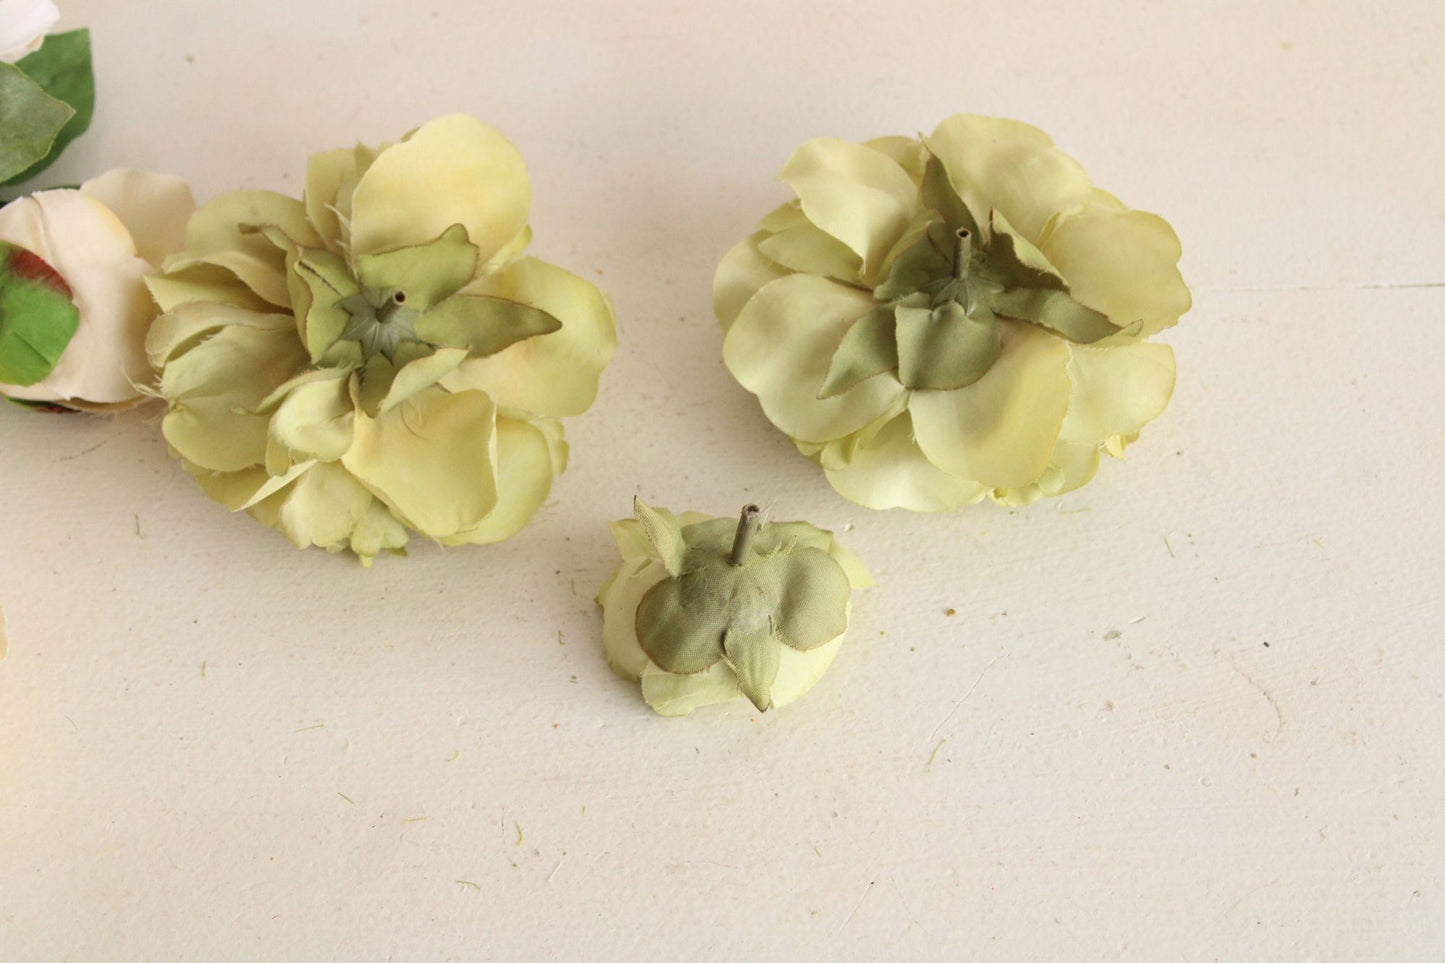 Lot of Silk Faux Flowers, Three Apple Green Florals, Millinery Crafting